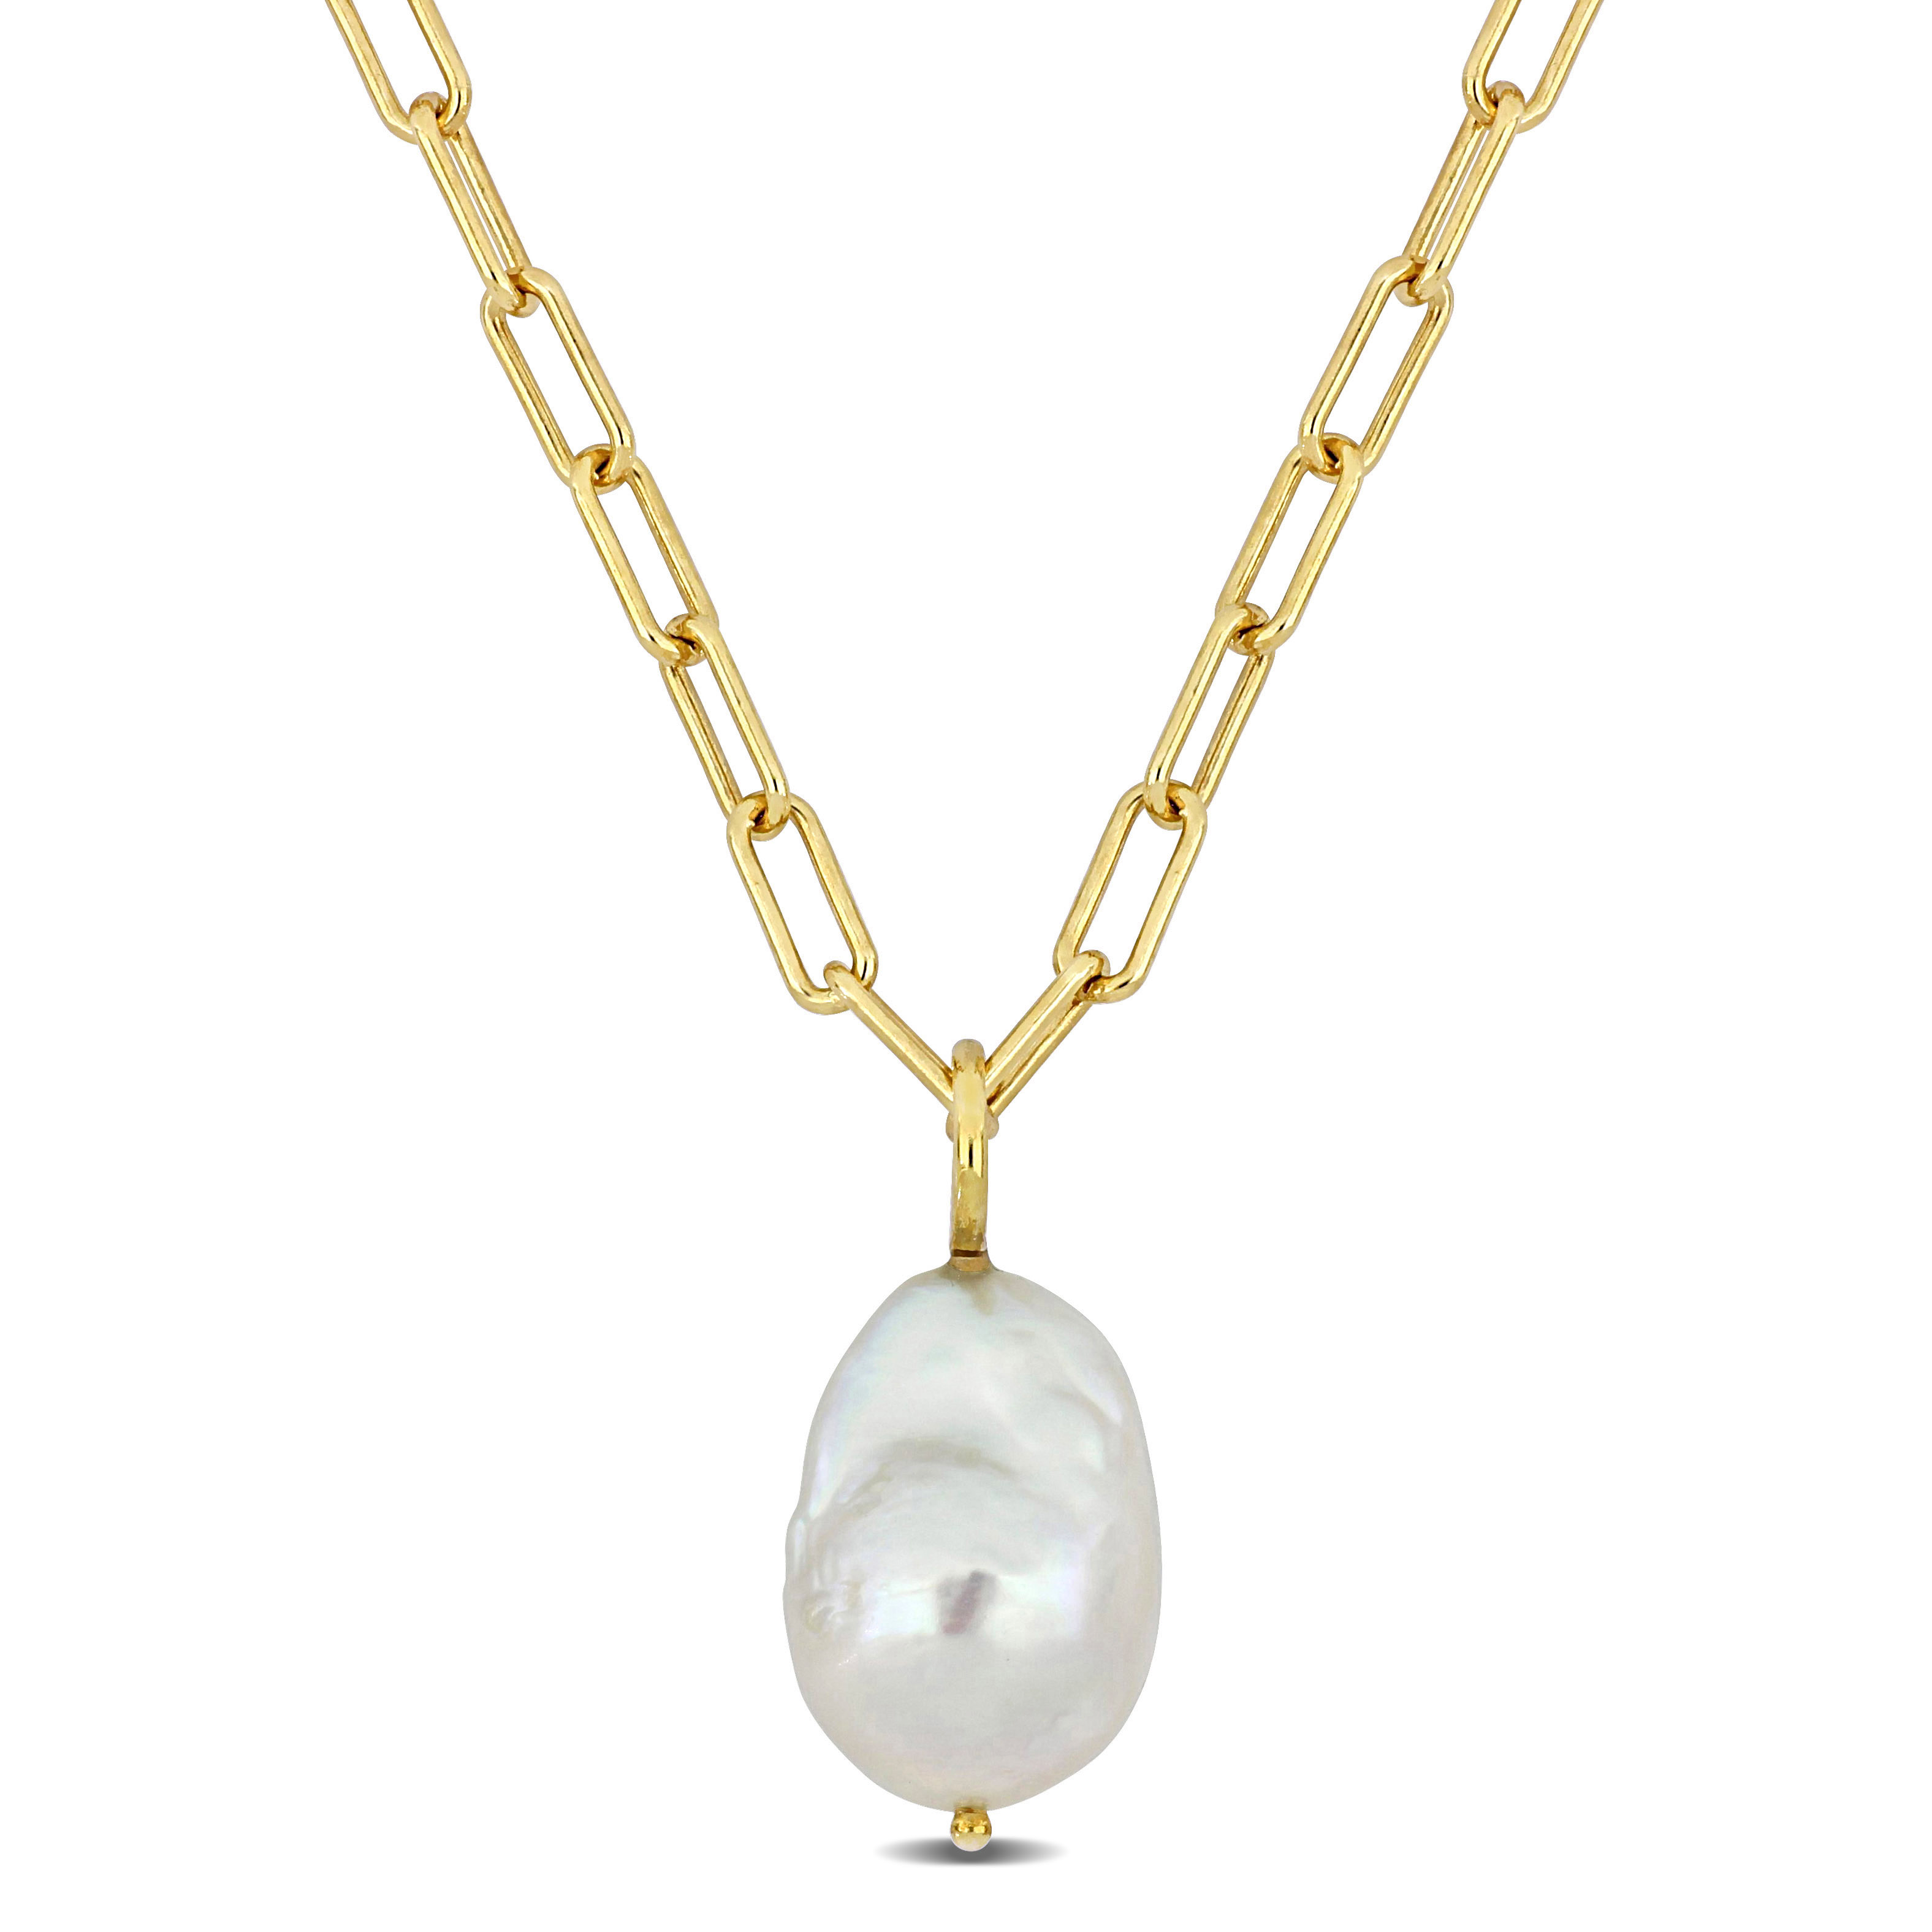 13-14 MM Natural Shape Cultured Freshwater Pearl and 3.5 MM Oval Link Necklace in 18k Gold Plated Sterling Silver - 18 in